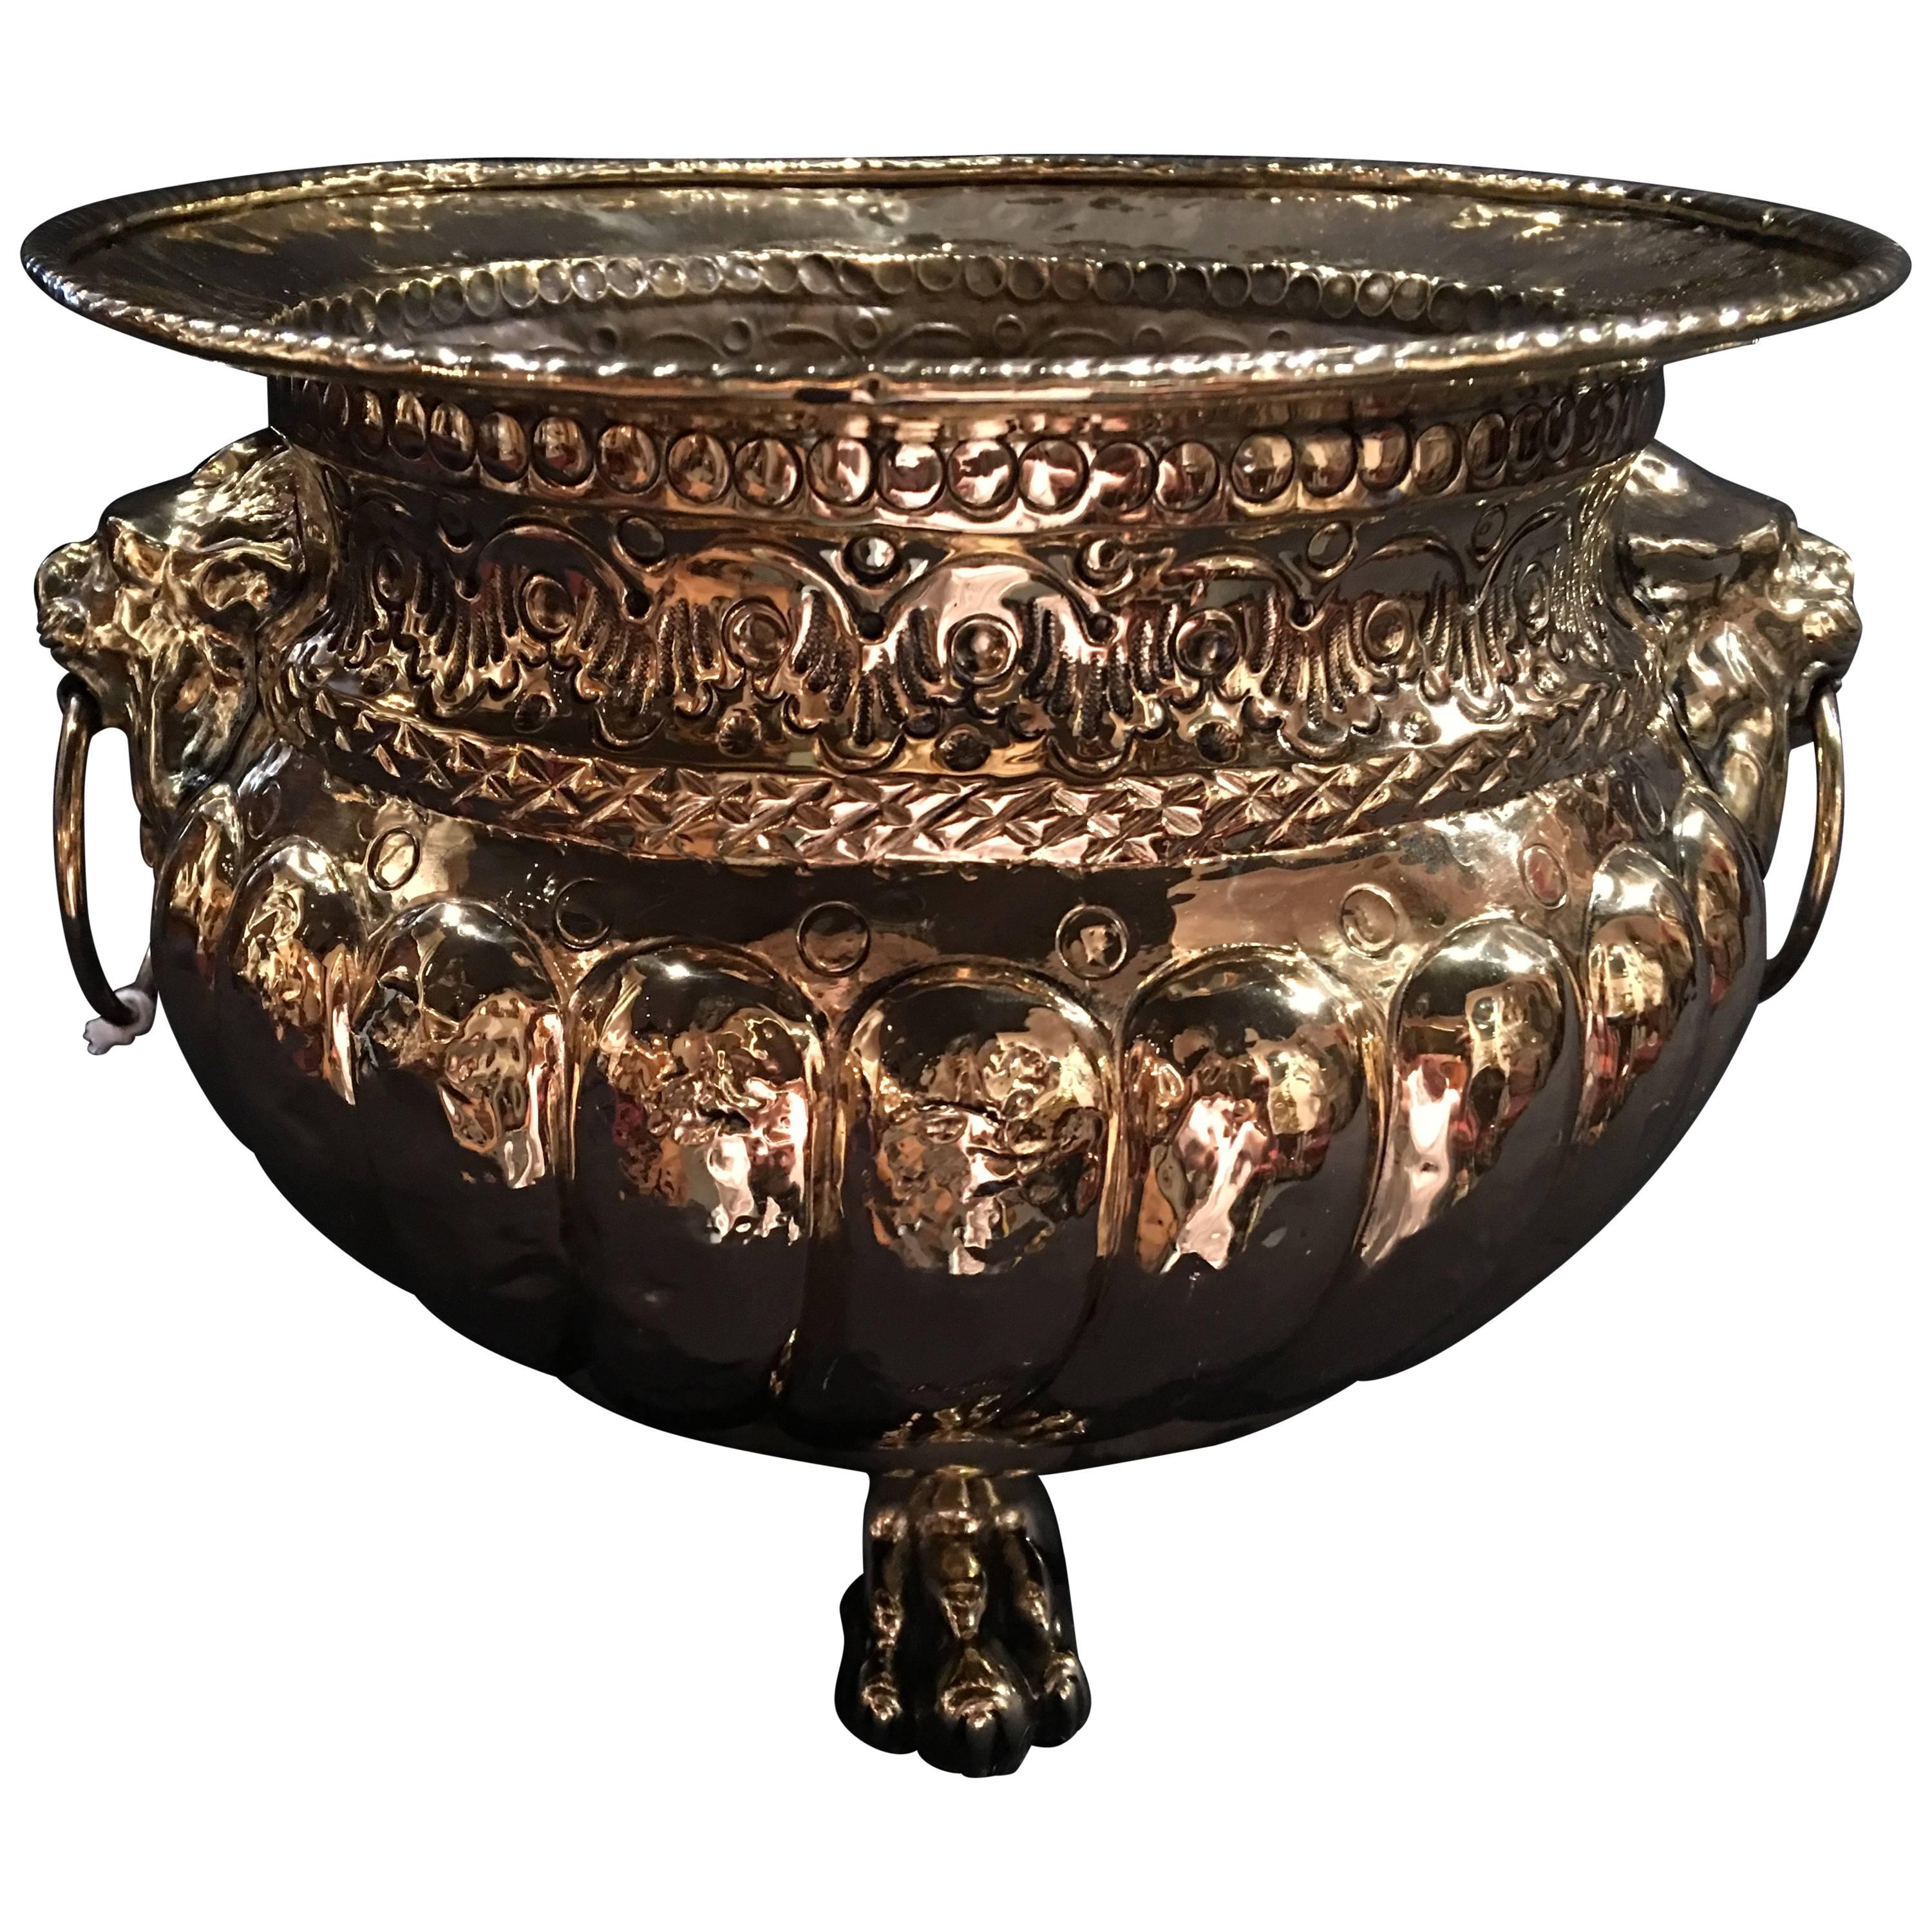 French Polished Brass Jardiniere with Lion Ring Handles, 19th Century